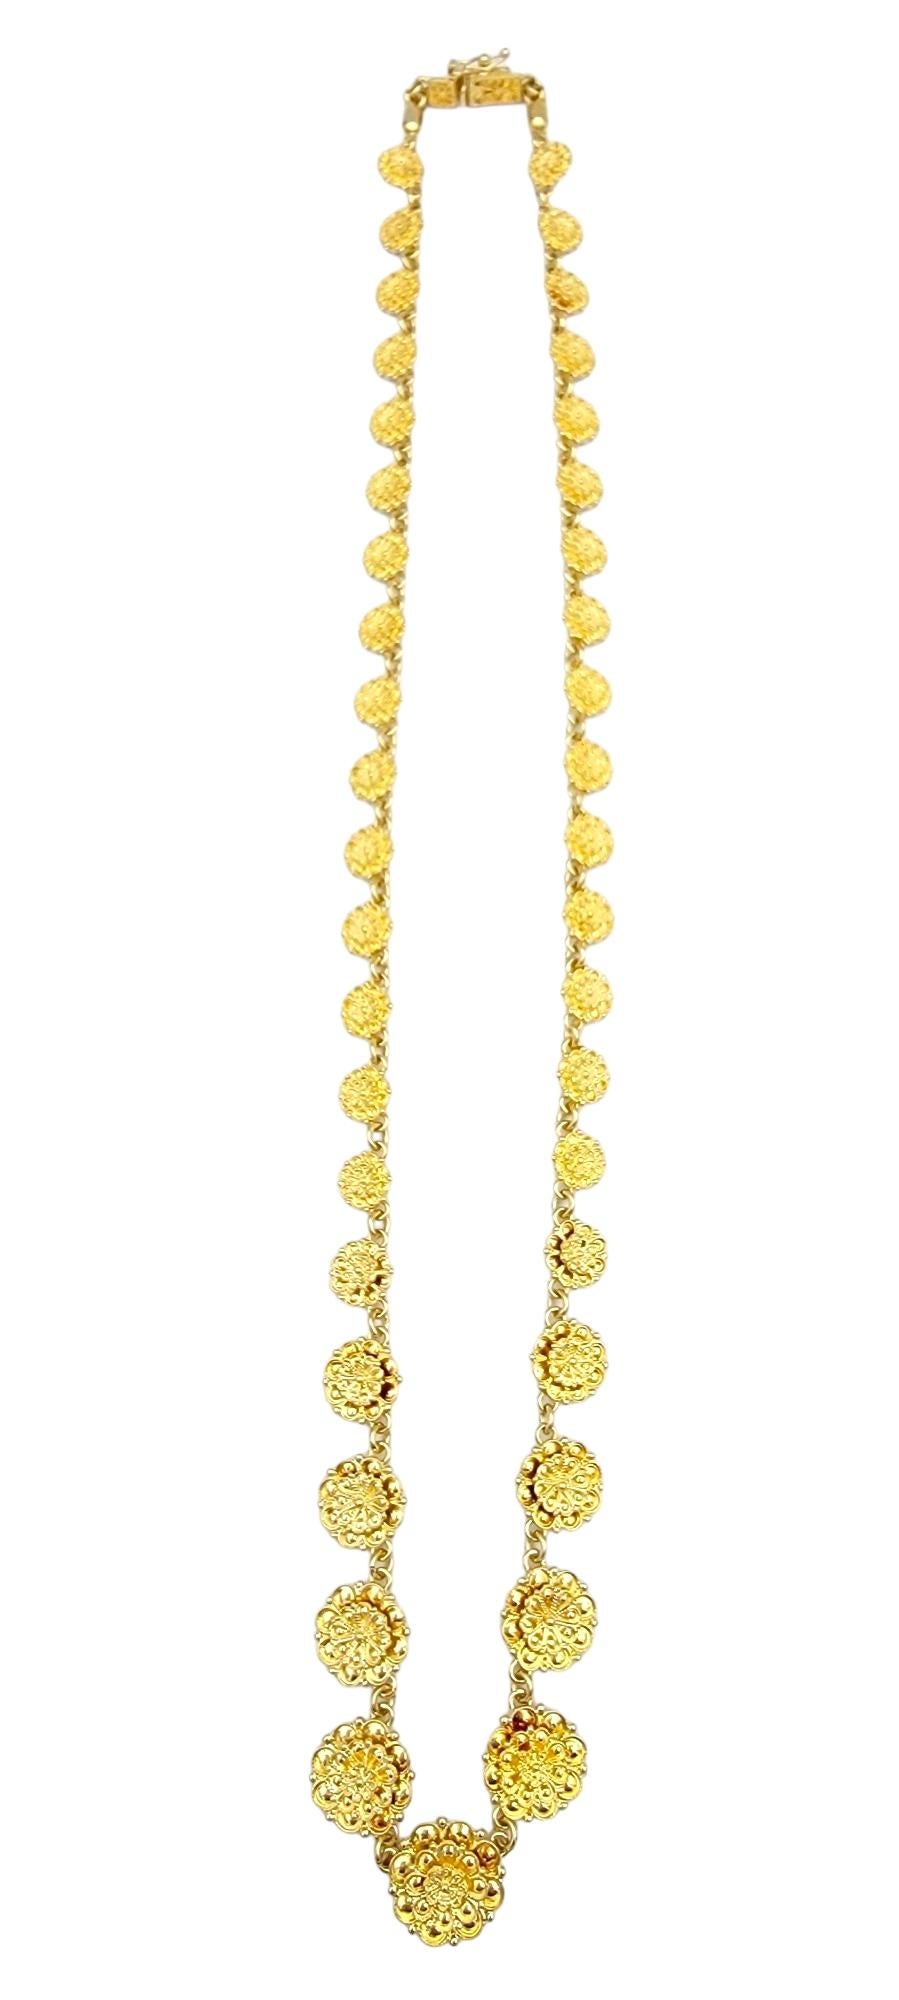 Contemporary Graduated Flower Design Textured Link Necklace Set in 18 Karat Yellow Gold For Sale